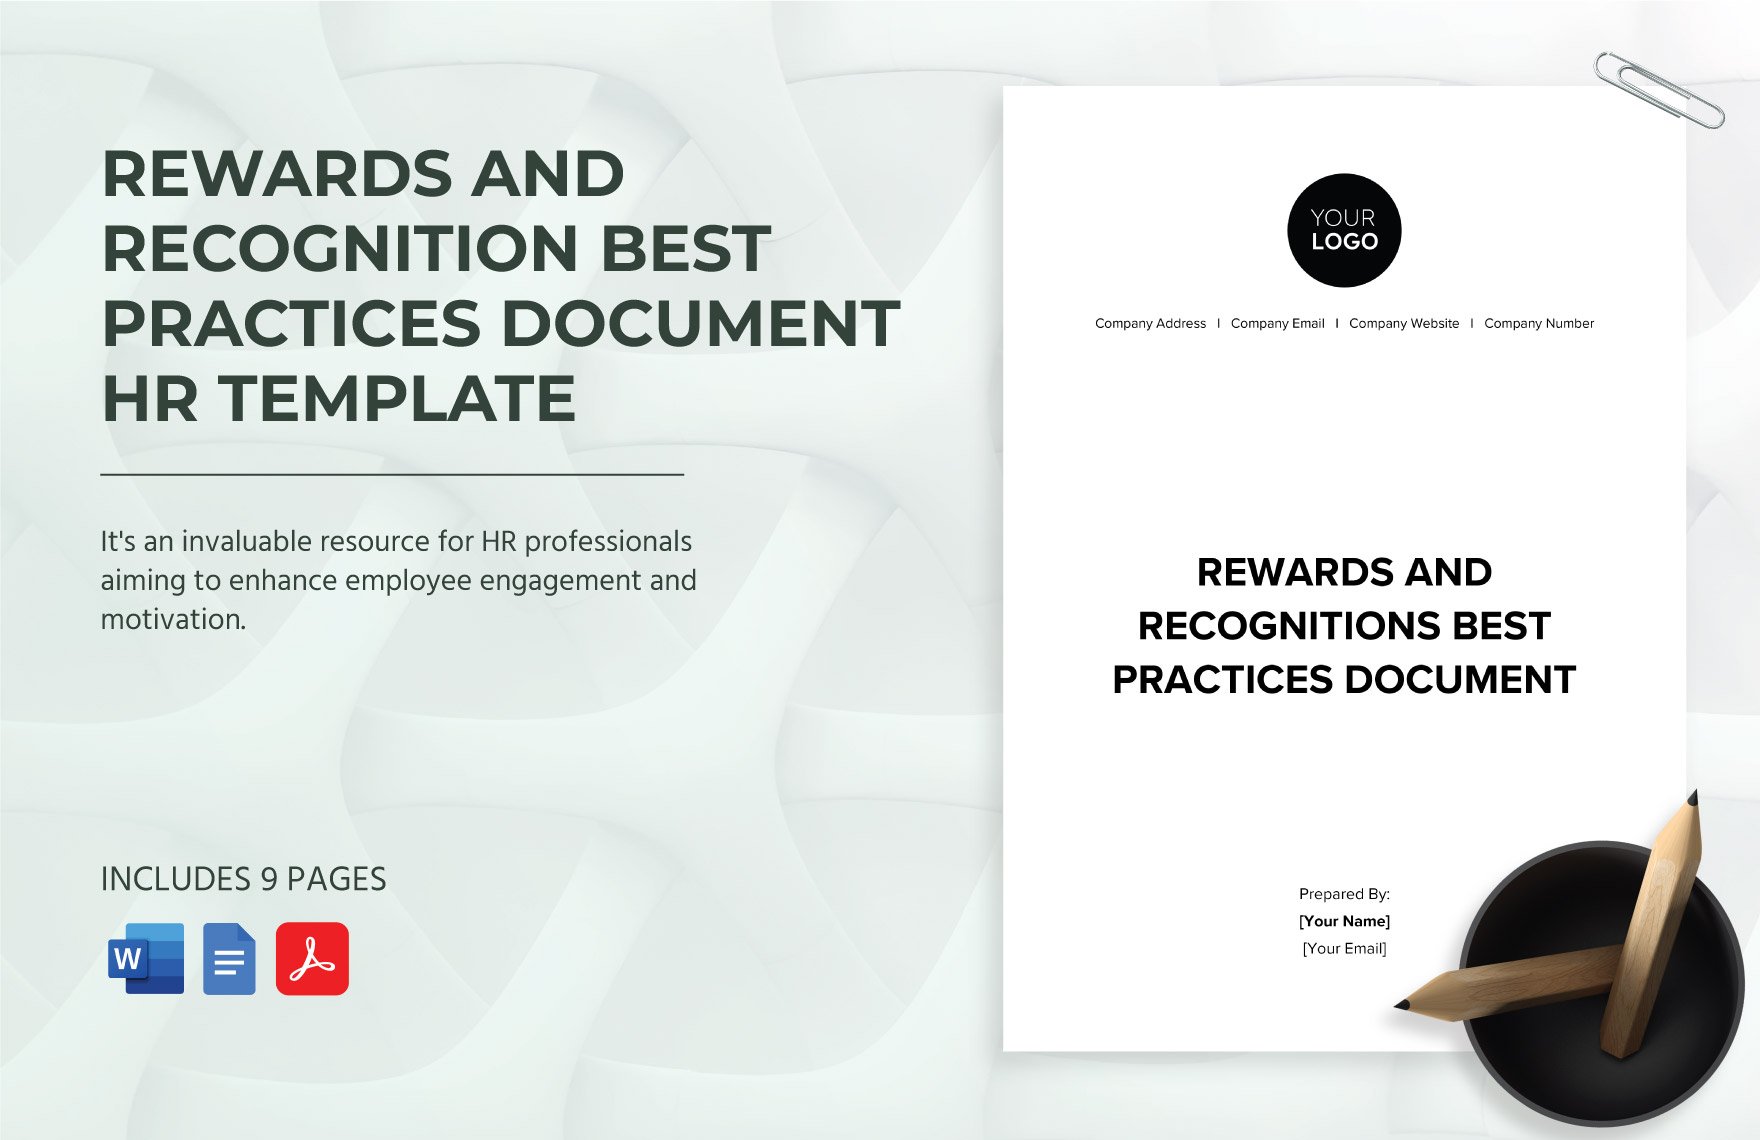 Rewards and Recognition Best Practices Document HR Template